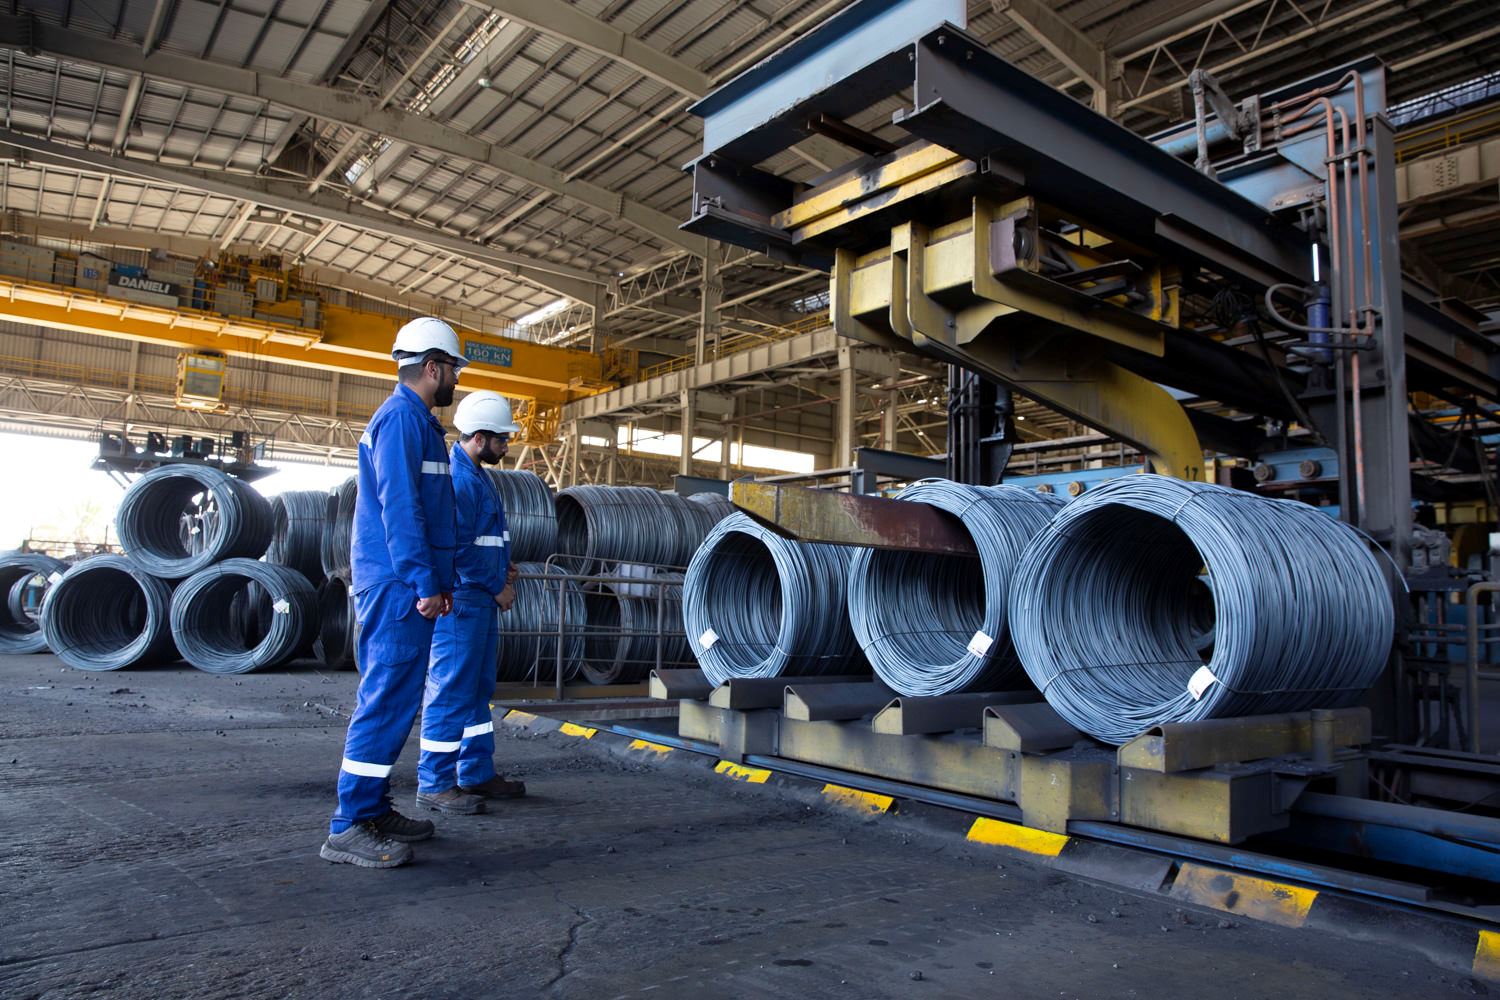 Emirates Steel Arkan expanding markets and profits 